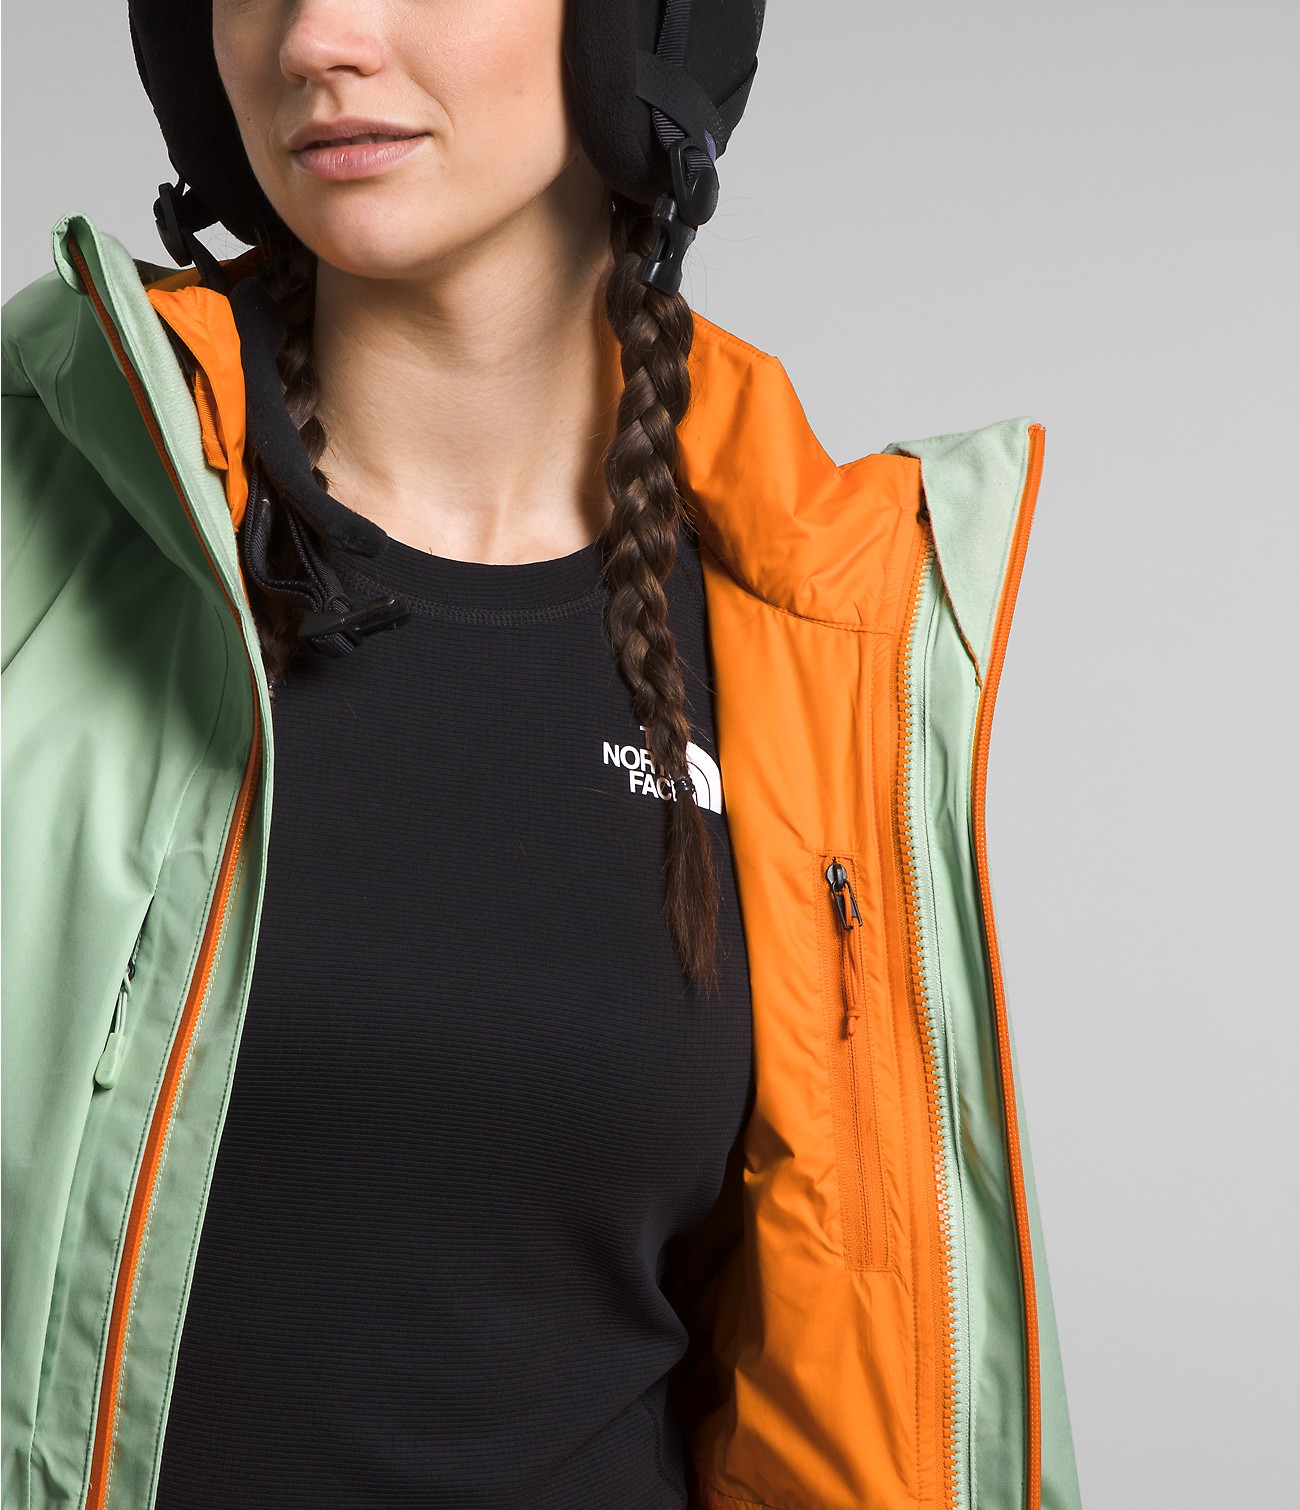 Women’s ThermoBall™ Eco Snow Triclimate® Jacket | The North Face